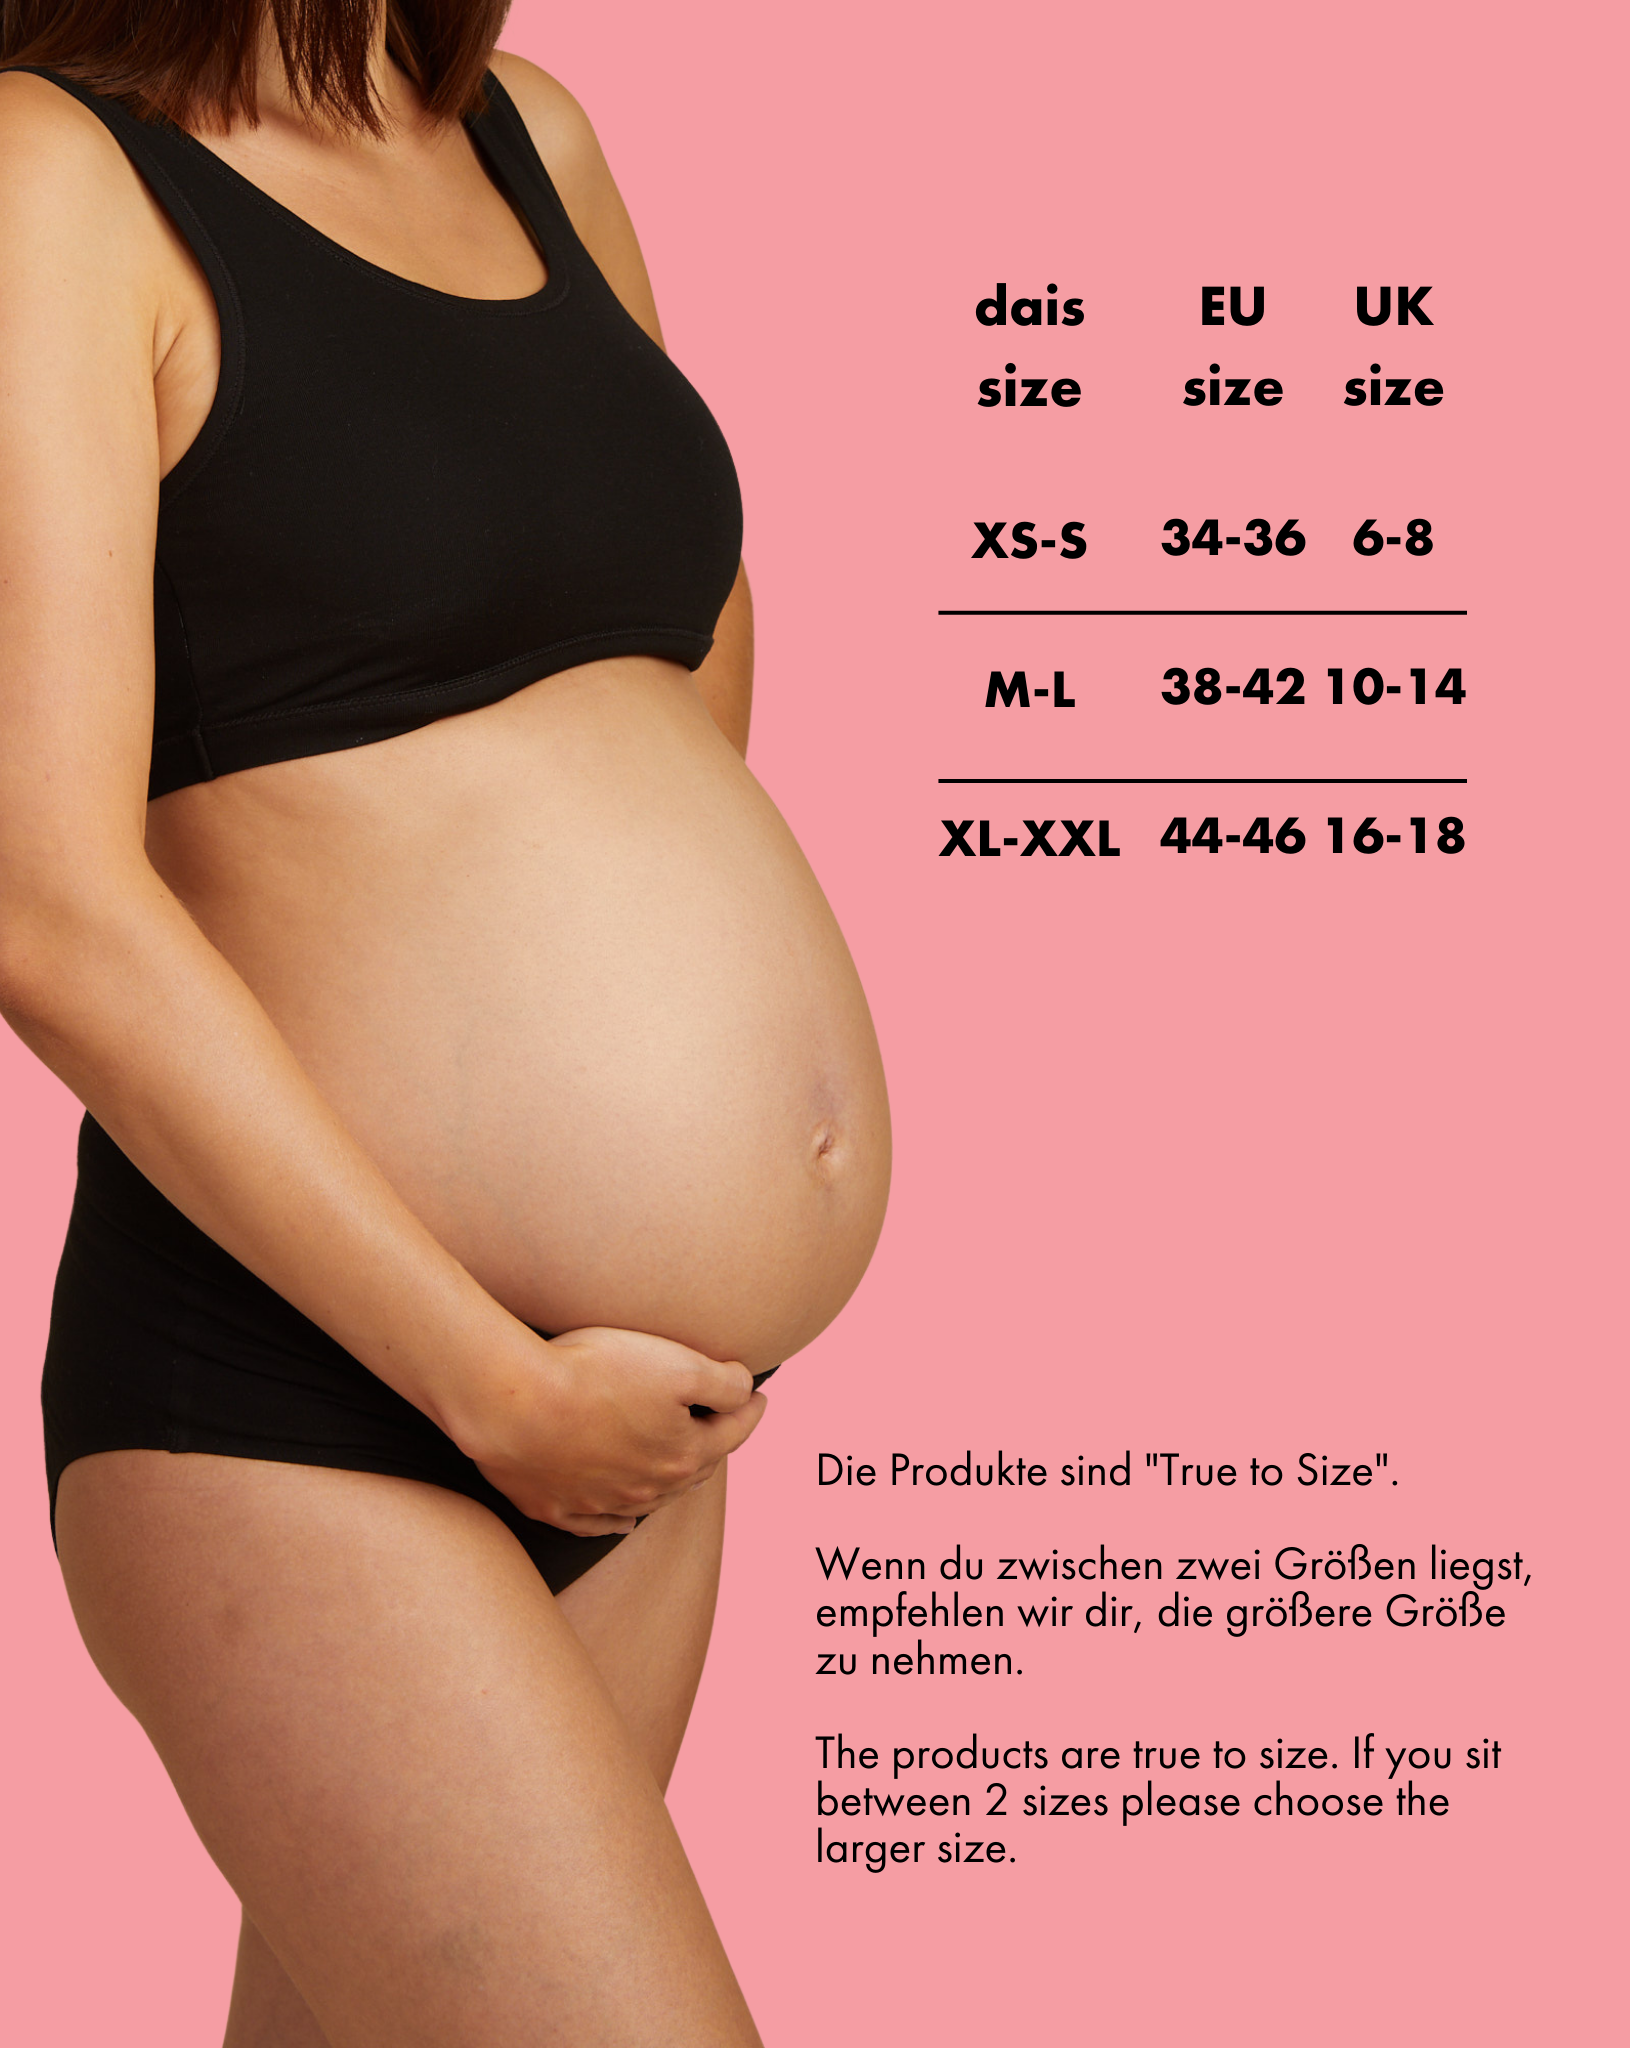 Size chart for dais maternity absorbent underwear with XS-S-, M-L and XL-XXL sizes available. These are the equivalent of EU 34-36, 38-42, 44-46 and UK 6-8, 10-14, 16-18